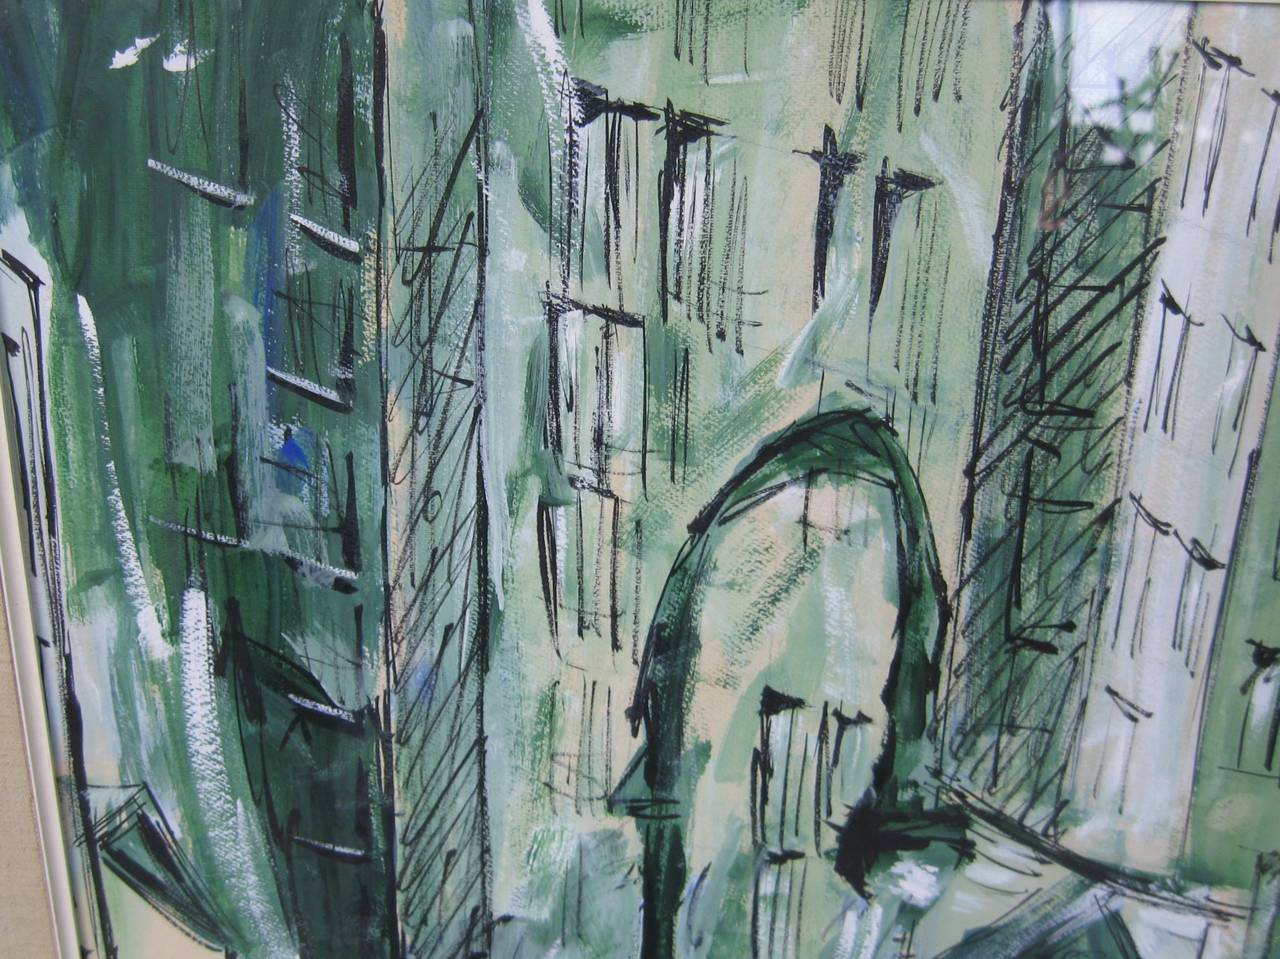 Stunning oil on canvas of lower Manhattan, blues and green hues. Notice the street signs. Signed Regan. I believe this is the original frame. Total measurements: 35.5 in x 25.5 in, canvas 29.25 in x 29. 3/8 in. Be sure to check our storefront for